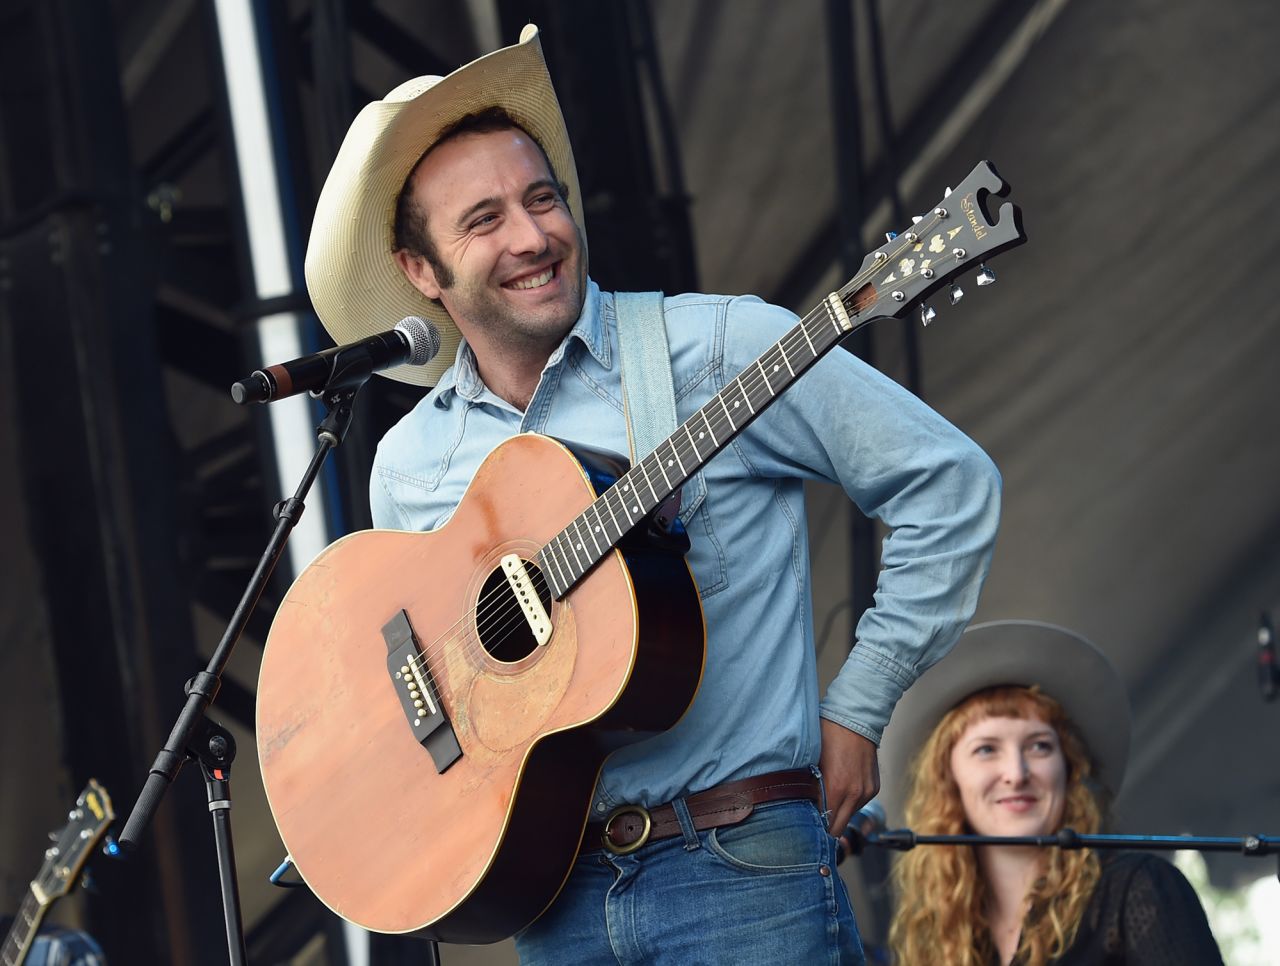 Country musician Luke Bell, who went missing in August, was found dead, according to officer Frank Magos from the Tucson Police Department. Bell was 32. Magos said an investigation was ongoing.